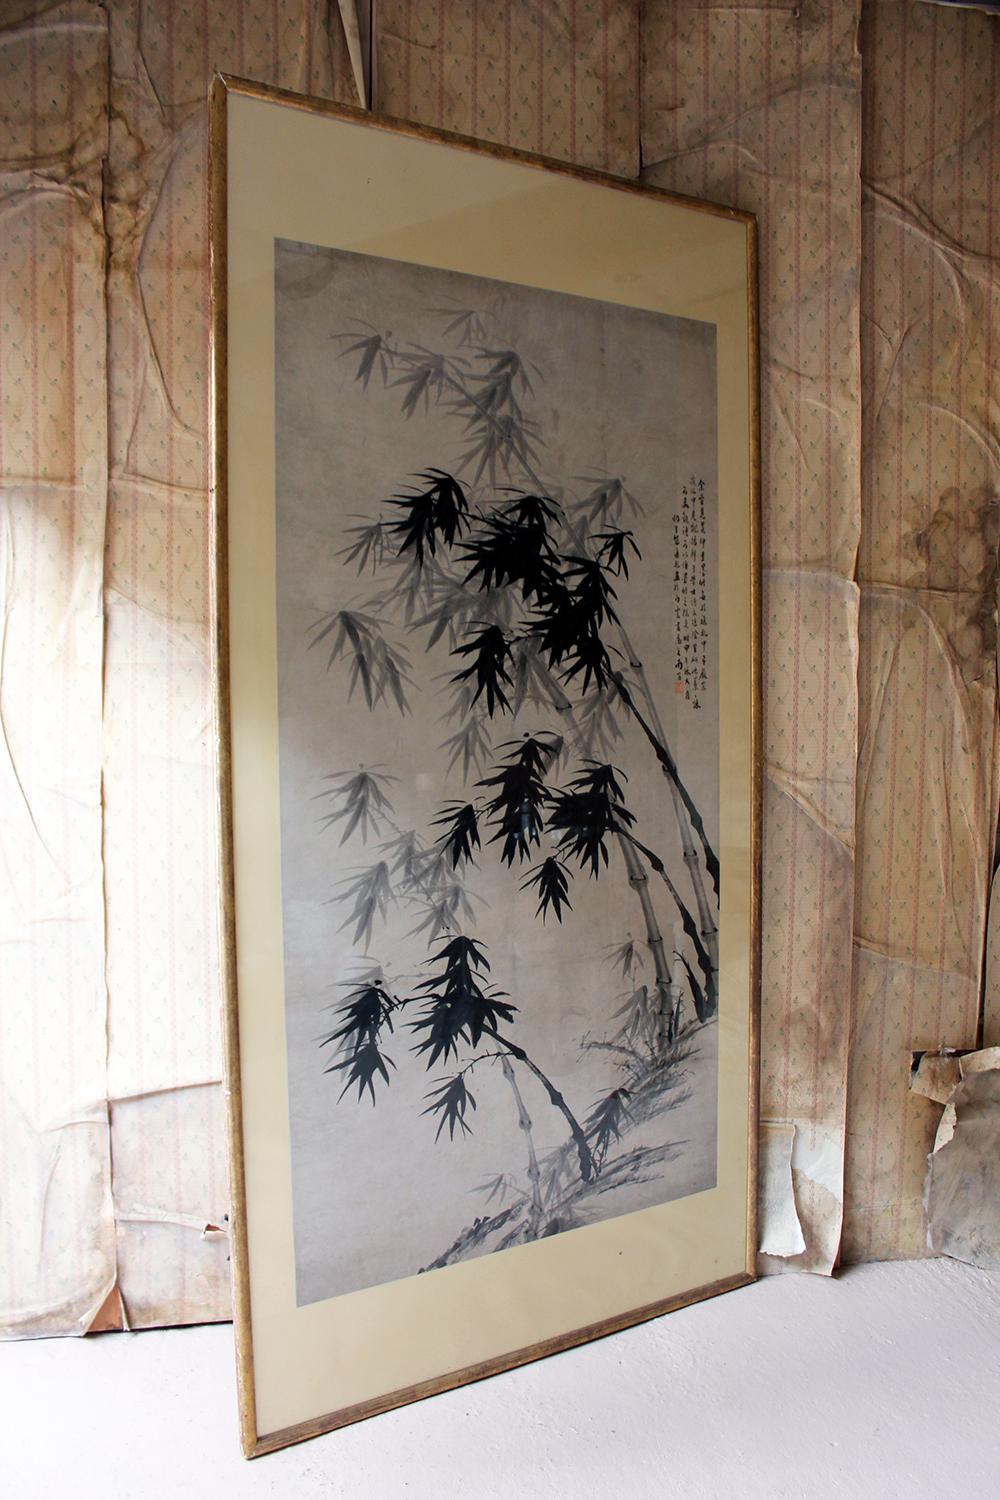 After 董其昌 Dong Qichang, Very Large Chinese Ink Painting of Bamboo, circa 1920-40 9